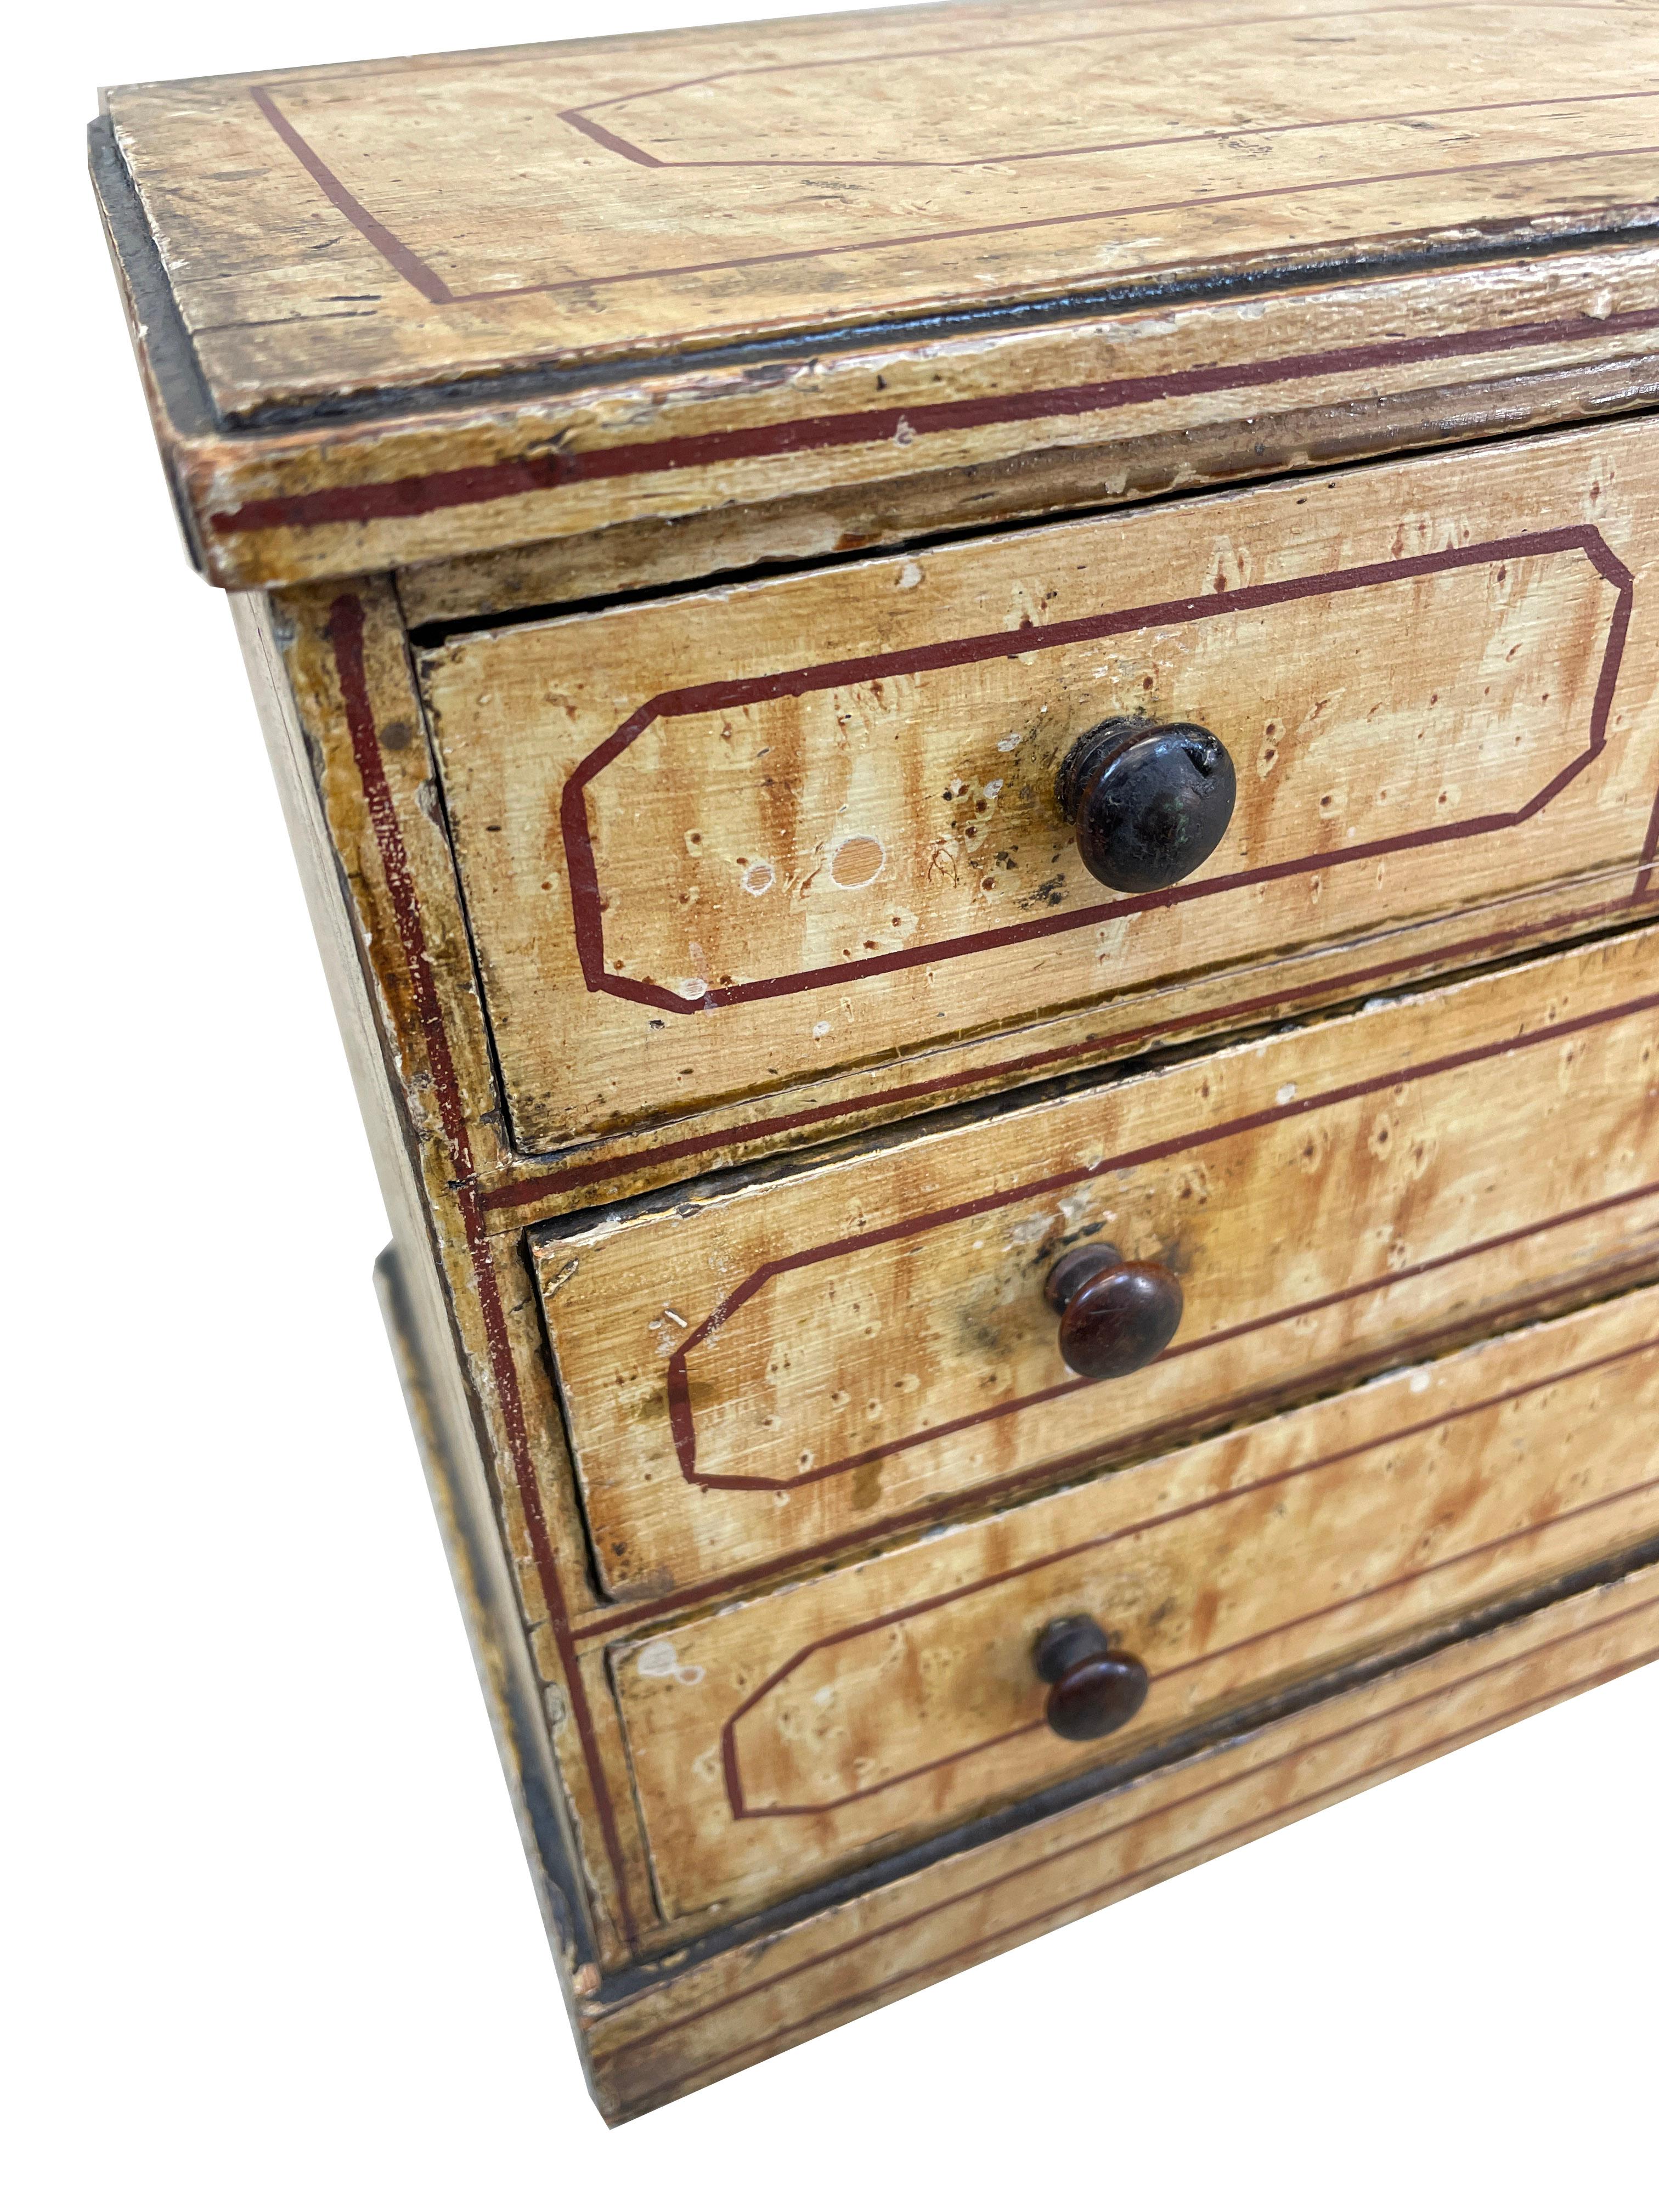 English Mid-19th Century Bird's-Eye Maple Simulated Miniature Chest For Sale